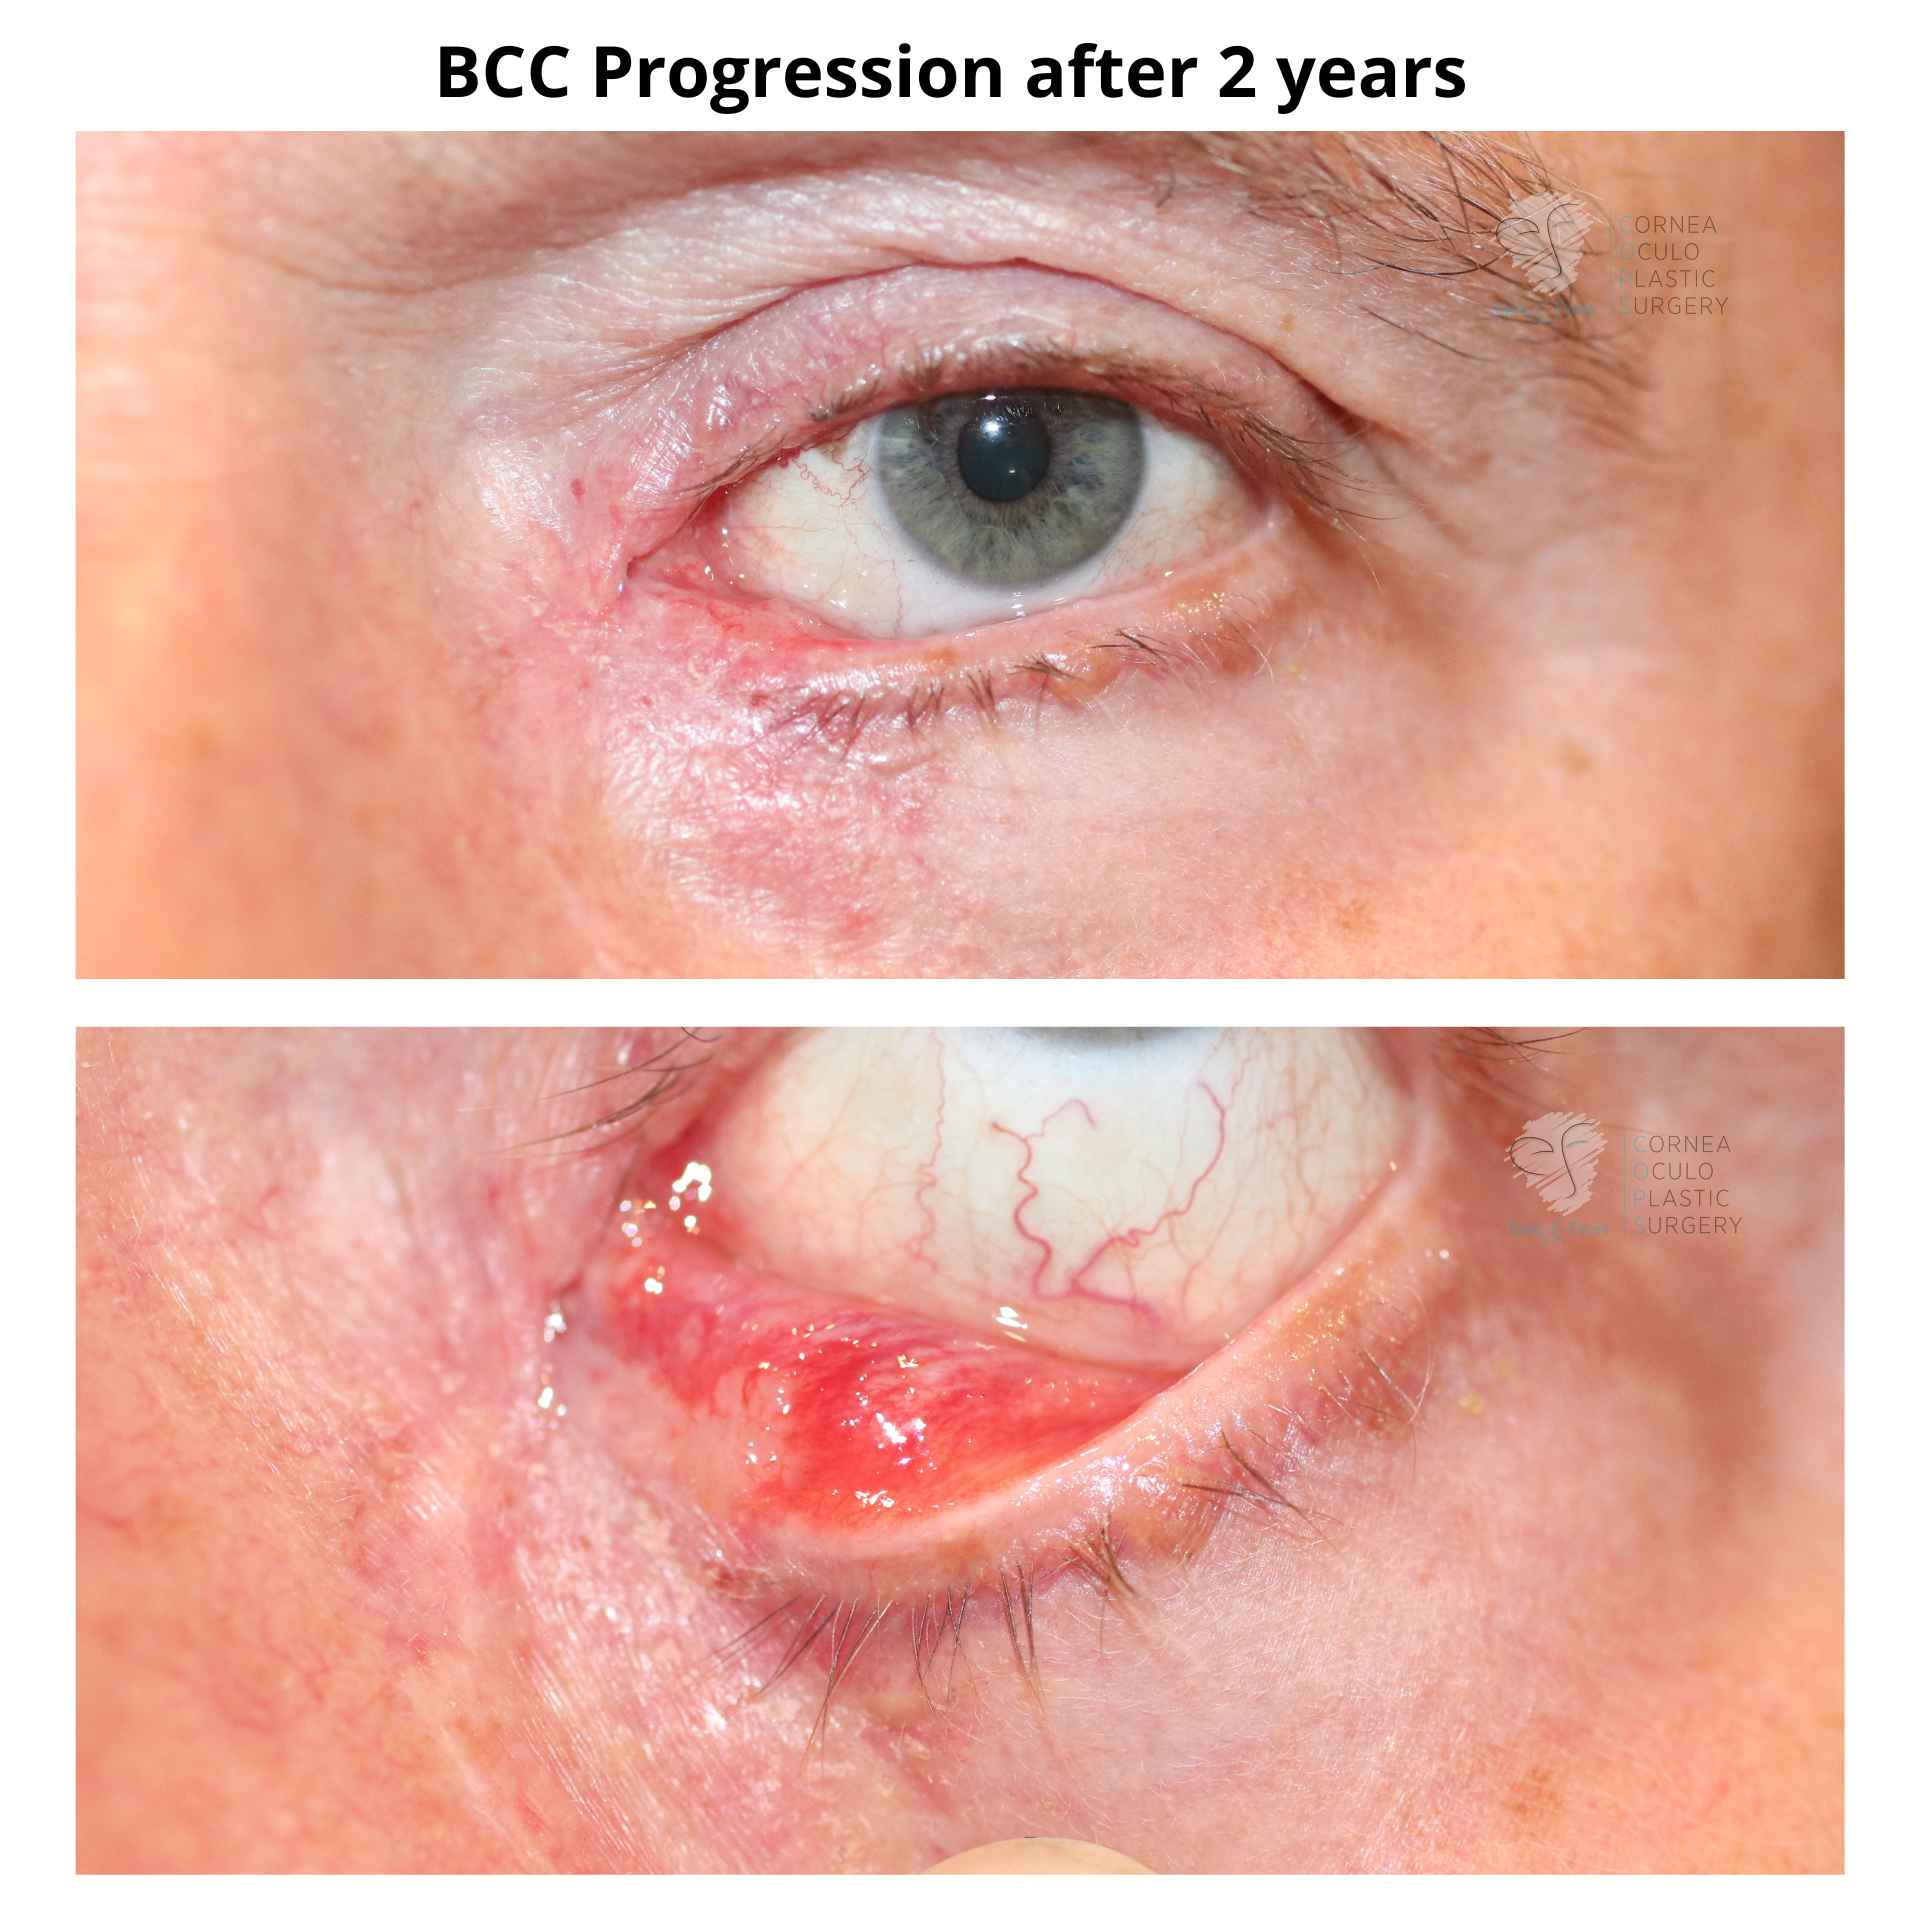 BCC progression after 2 years and no intervention. With the eyelid everted, you can see the BCC or cancer under the eyelid.